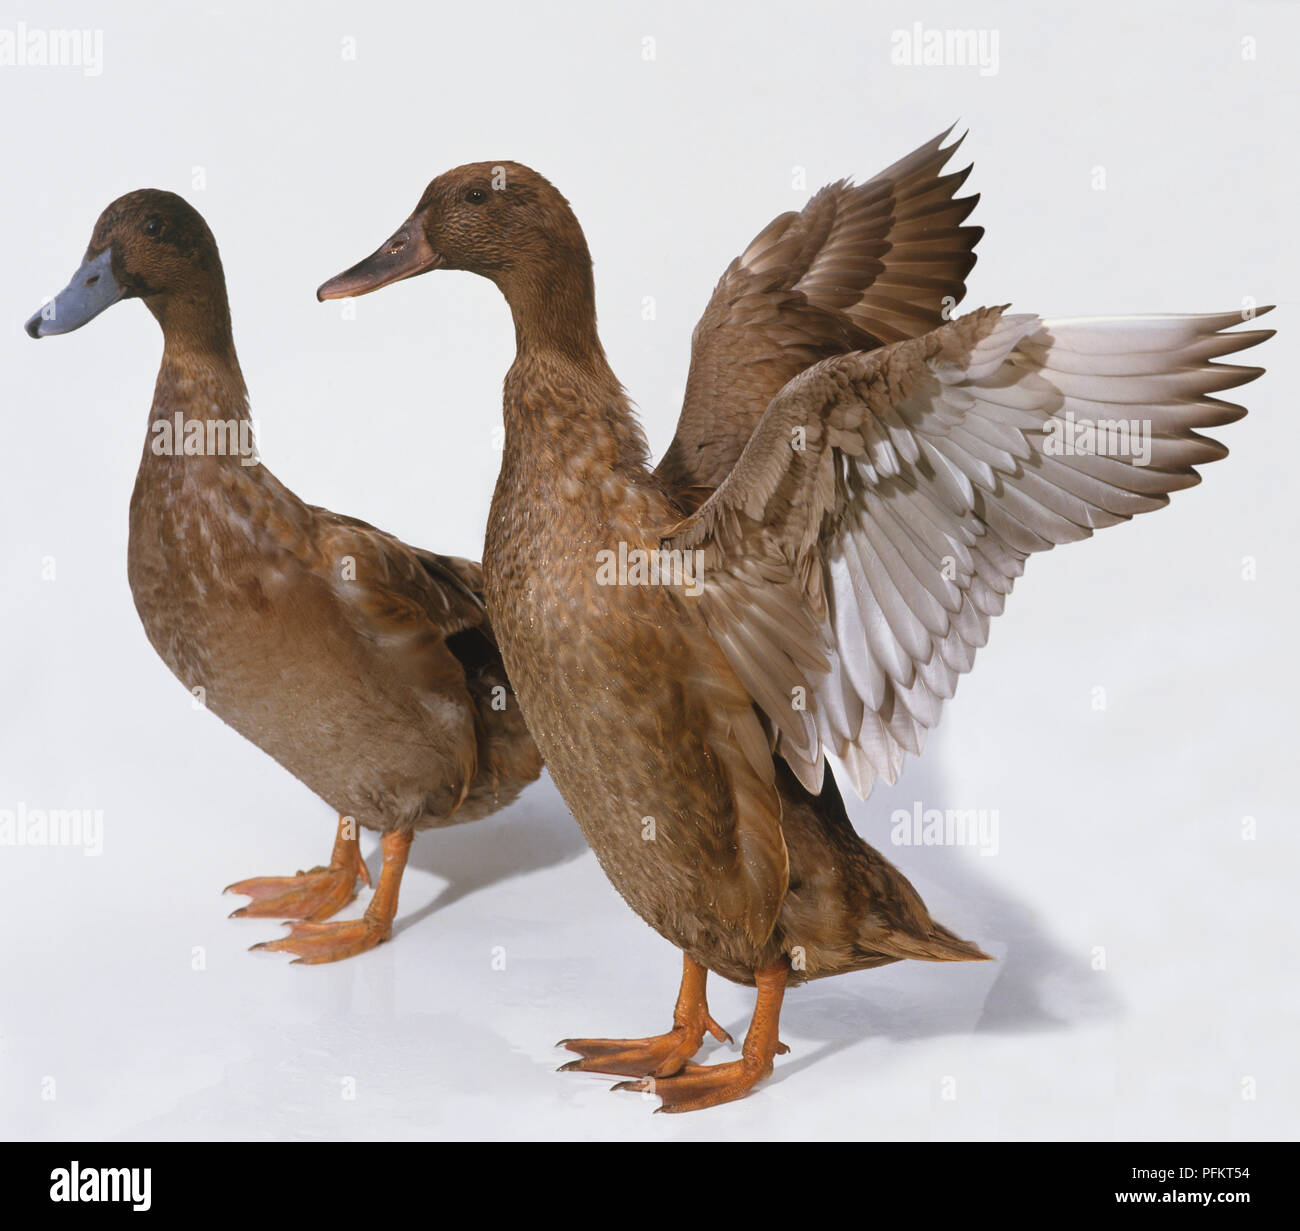 Duck opening its wings Stock Photo